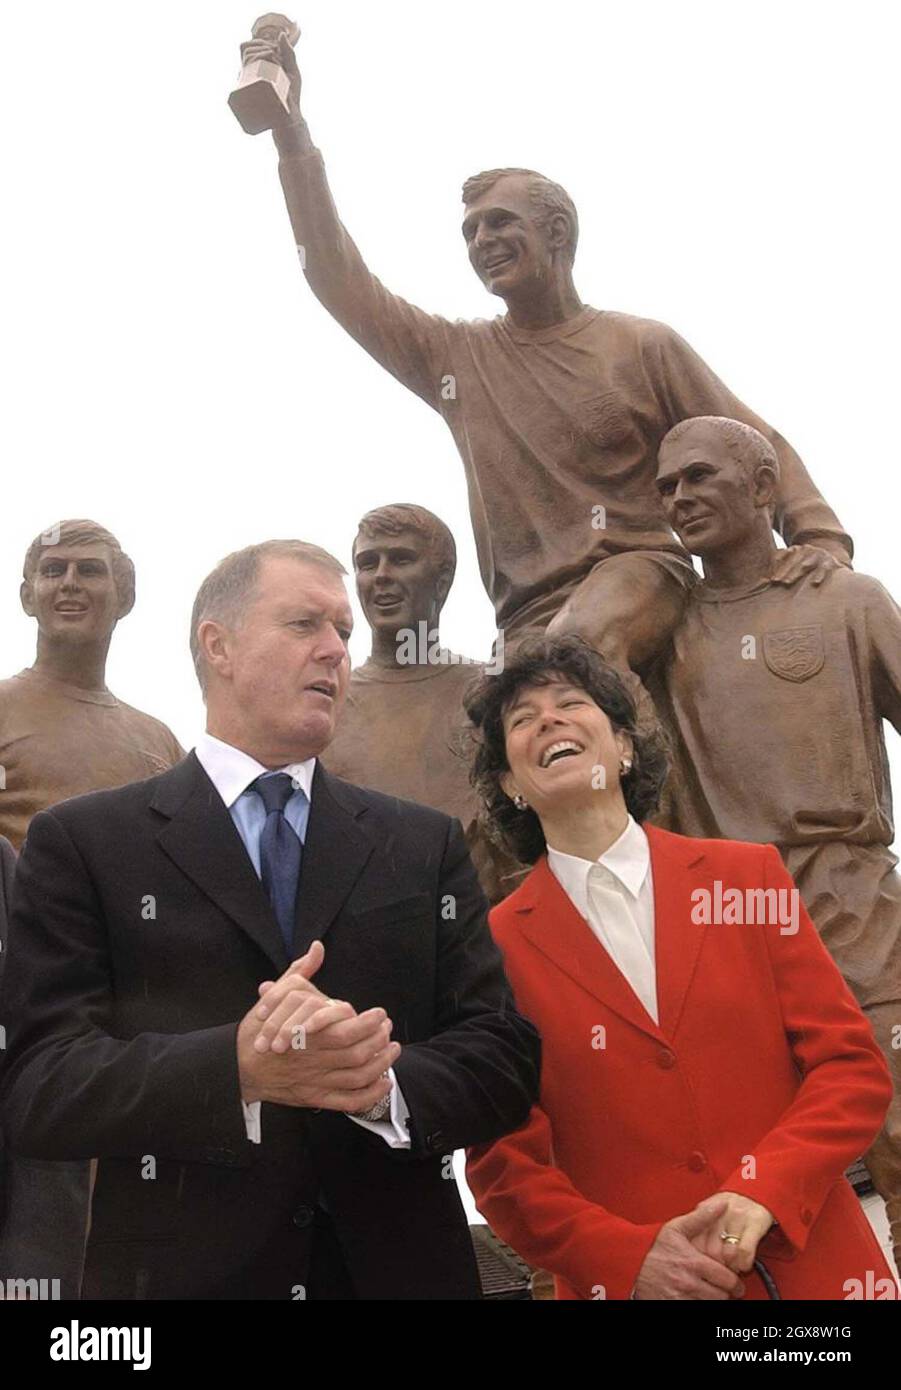 Former England footballer and member of the 1966 World Cup winning team Sir Geoff Hurst MBE, with Stephanie Moore, widow of England Captain Bobby Moore,stand in front of the statue unveiled by the Duke of York at West Ham's Upton Park ground in east London. Half length, suit  Â©Anwar Hussein/allaction.co.uk  Stock Photo